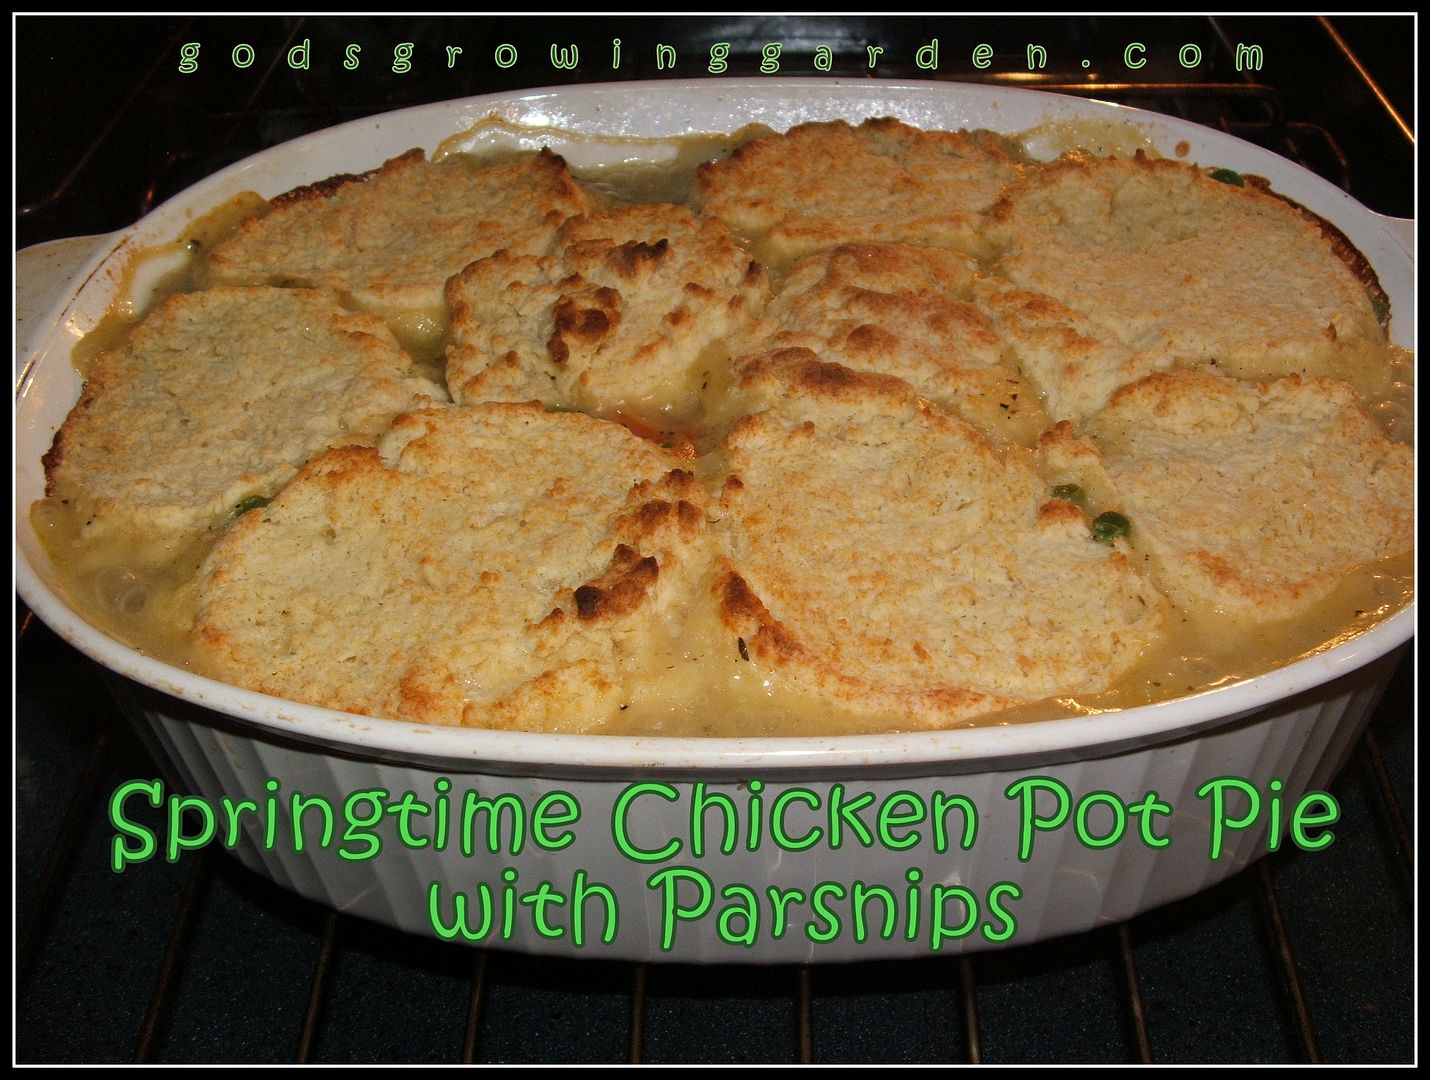 Springtime Chicken Pot Pie by Angie Ouellette-Tower for godsgrowinggarden.com photo 012_zps21338ea0.jpg